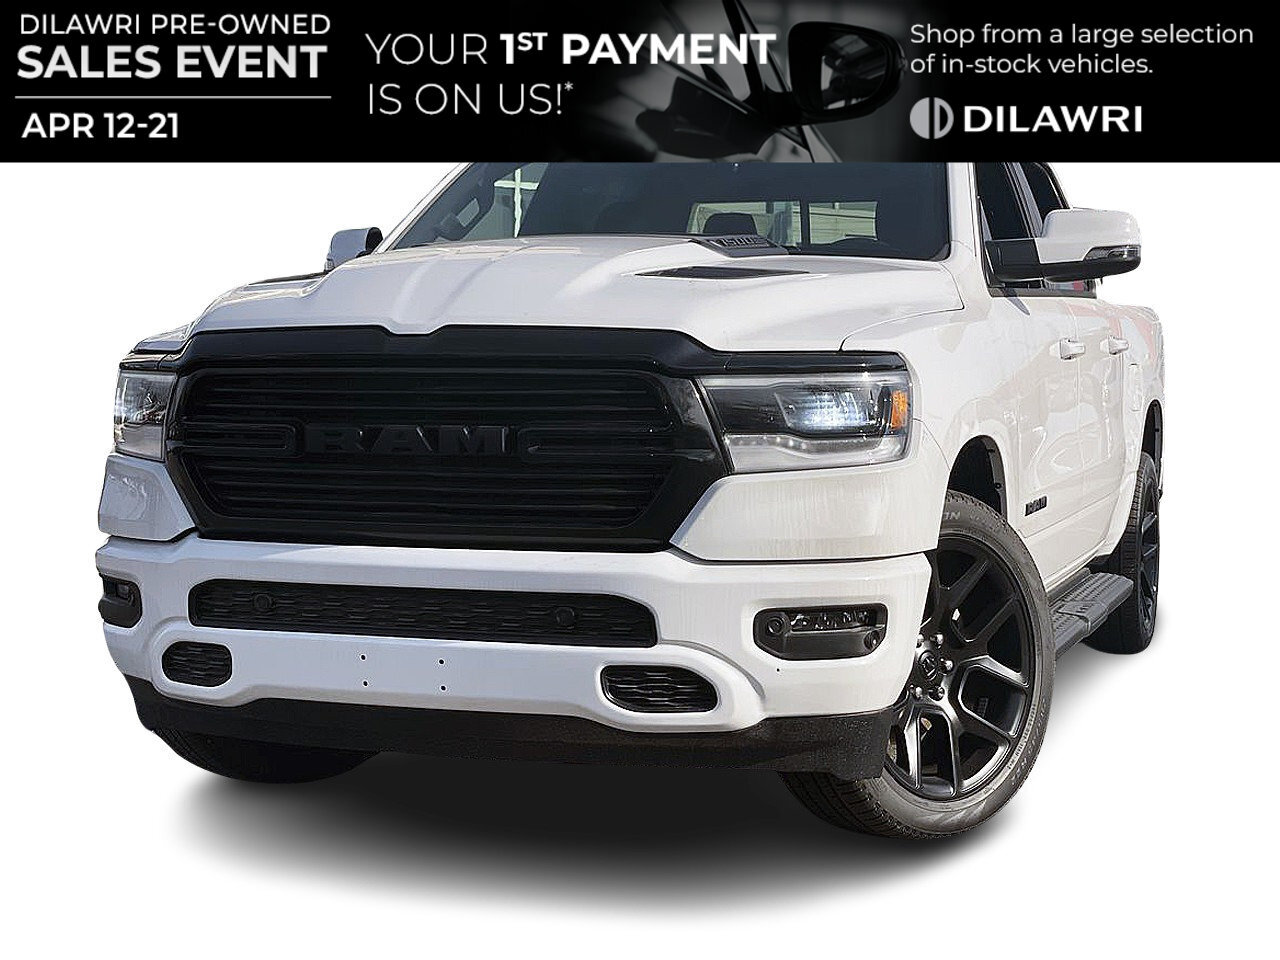 2023 Ram 1500 Crew Cab Sport SWB Includes Immobilizer | Save On Insurance